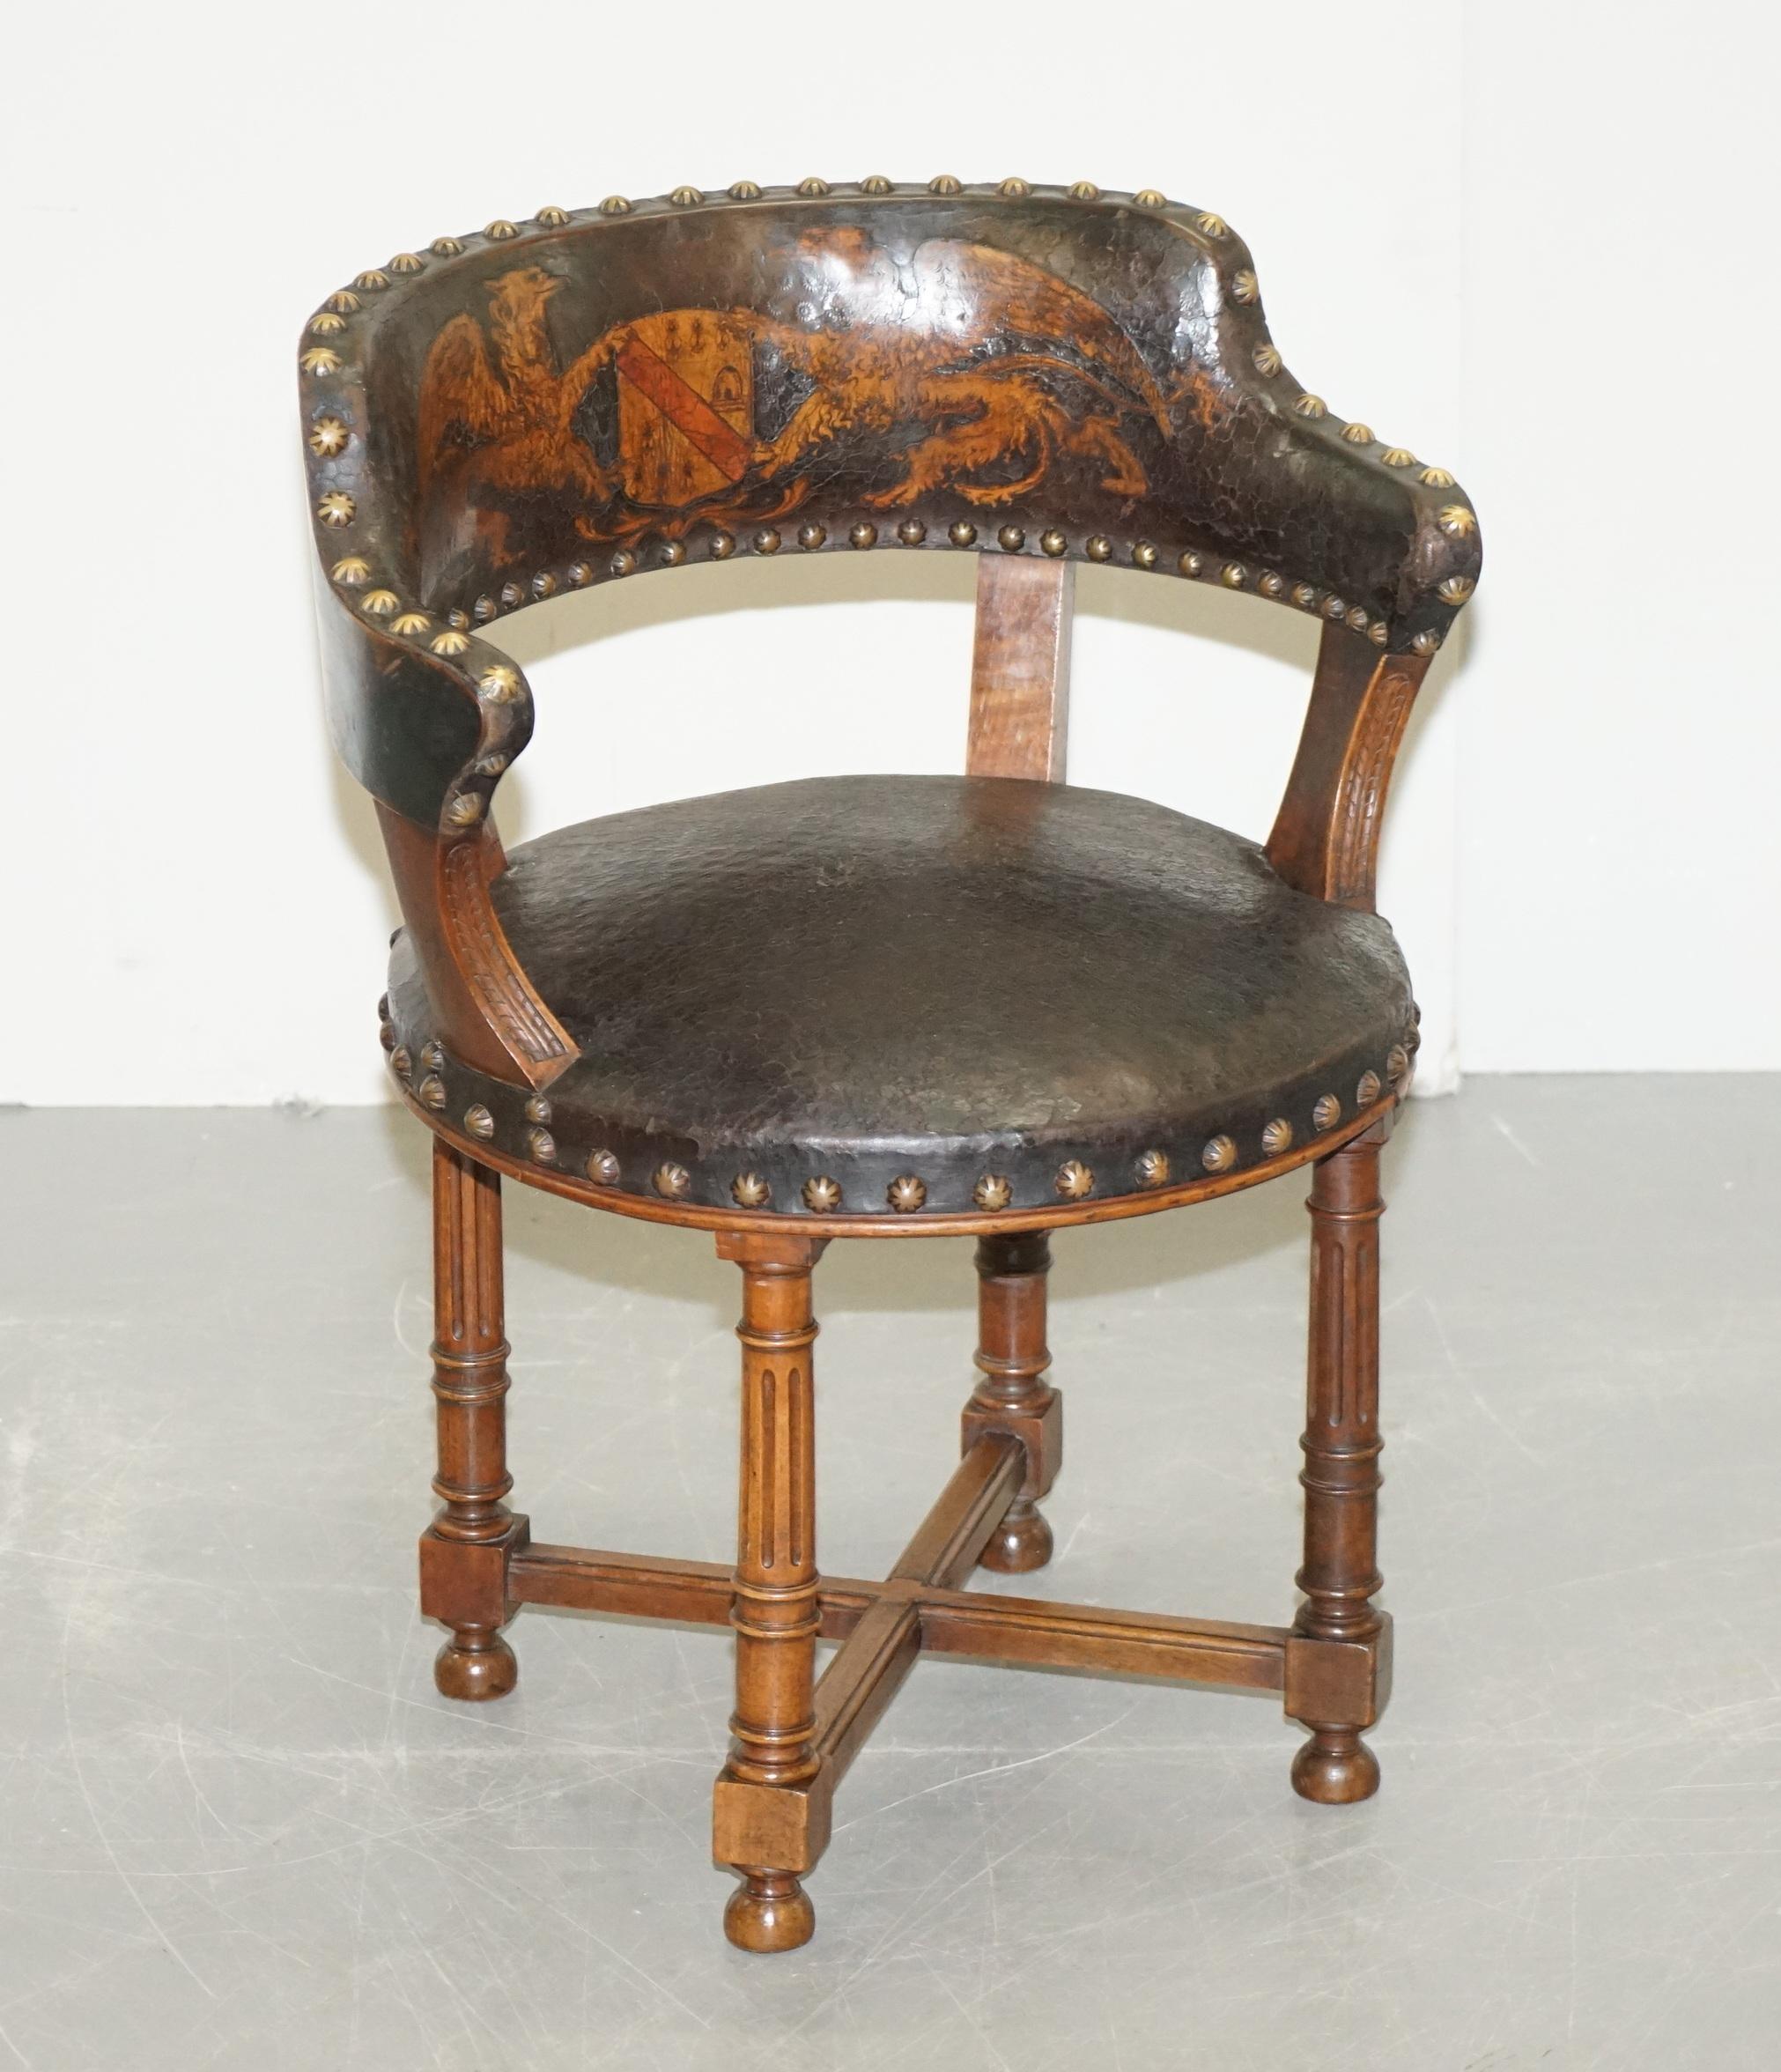 Wimbledon-Furniture

Wimbledon-Furniture is delighted to offer for sale this absolutely exquisite circa 1880 Victorian walnut framed with embossed brown leather upholstery captain’s chair with armorial crest coat of arms depicting Griffons holding